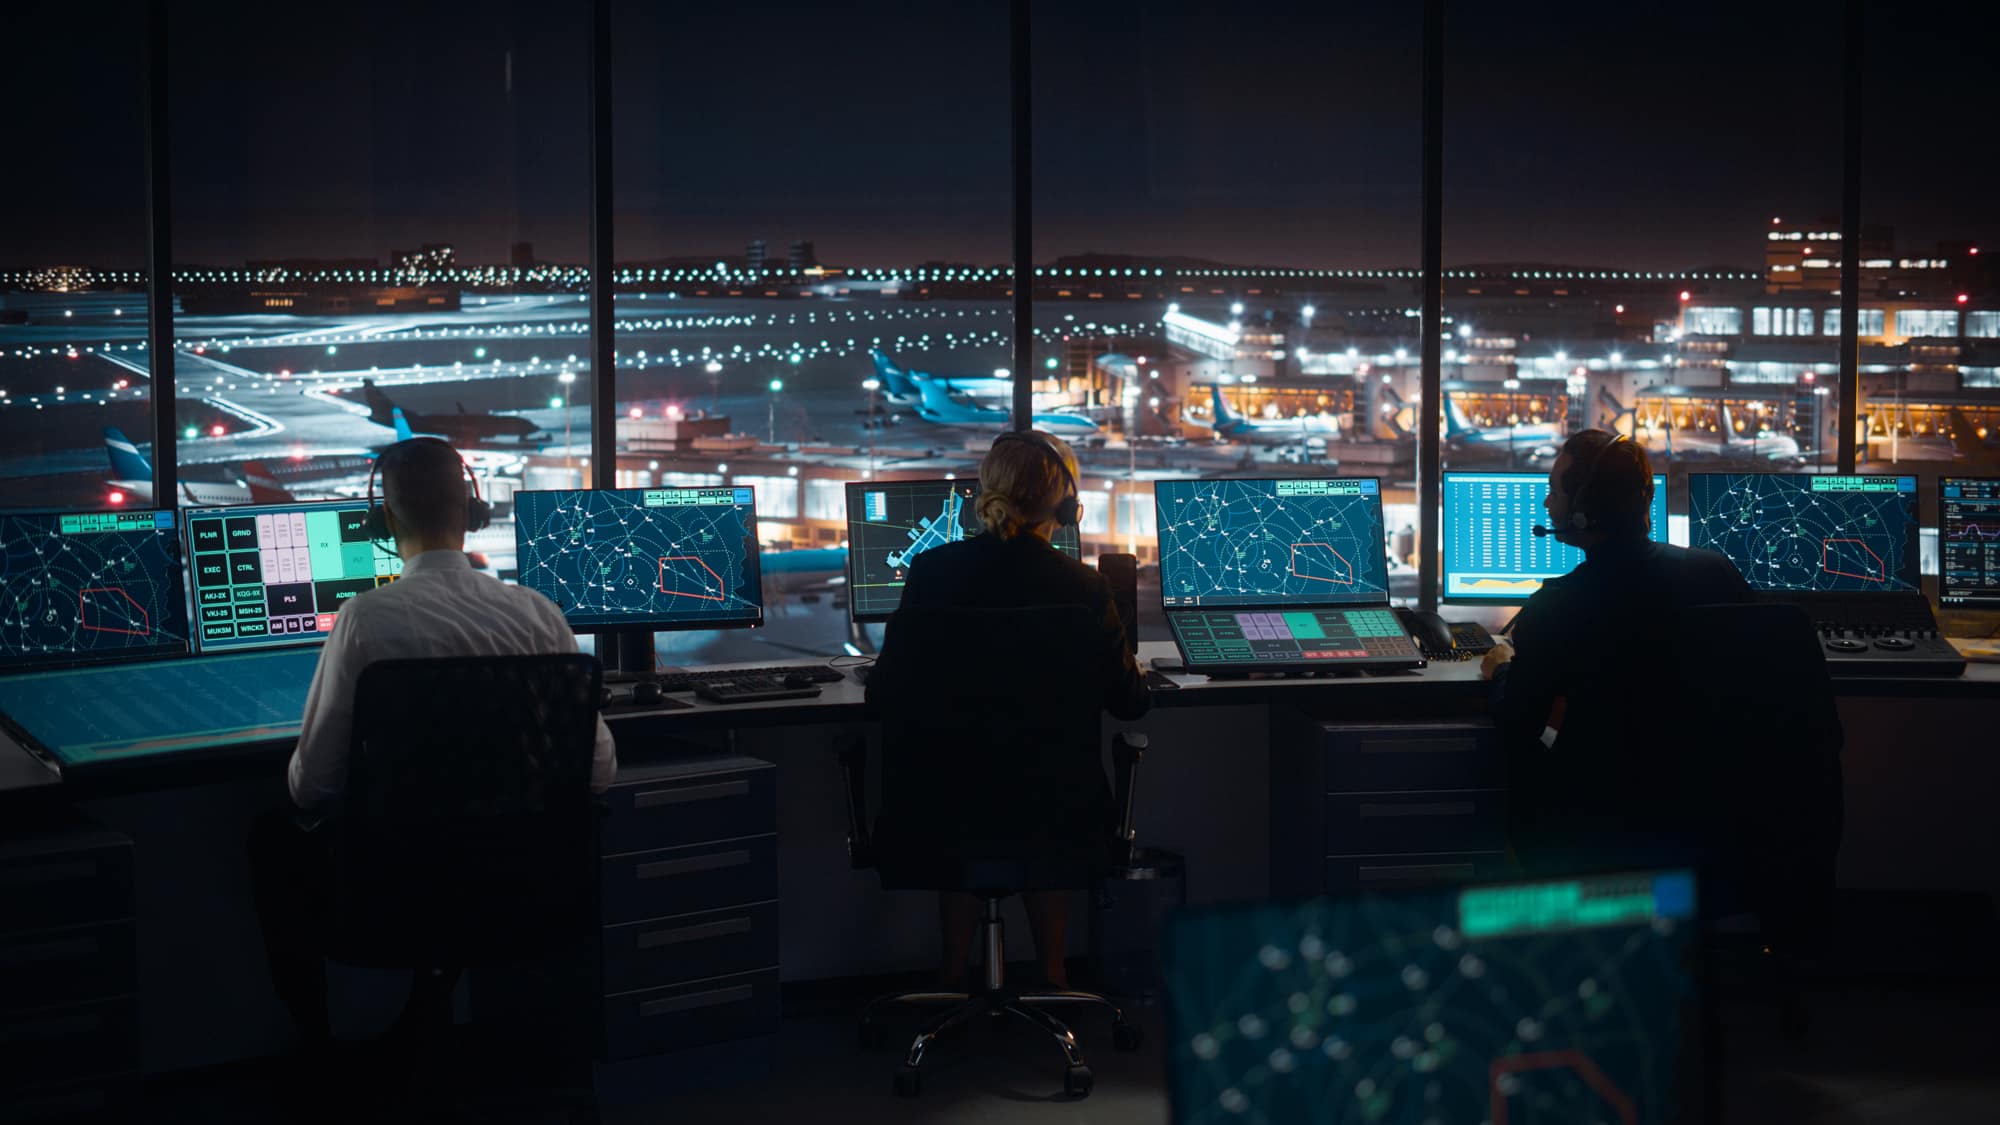 Air traffic controllers working at an airport at night